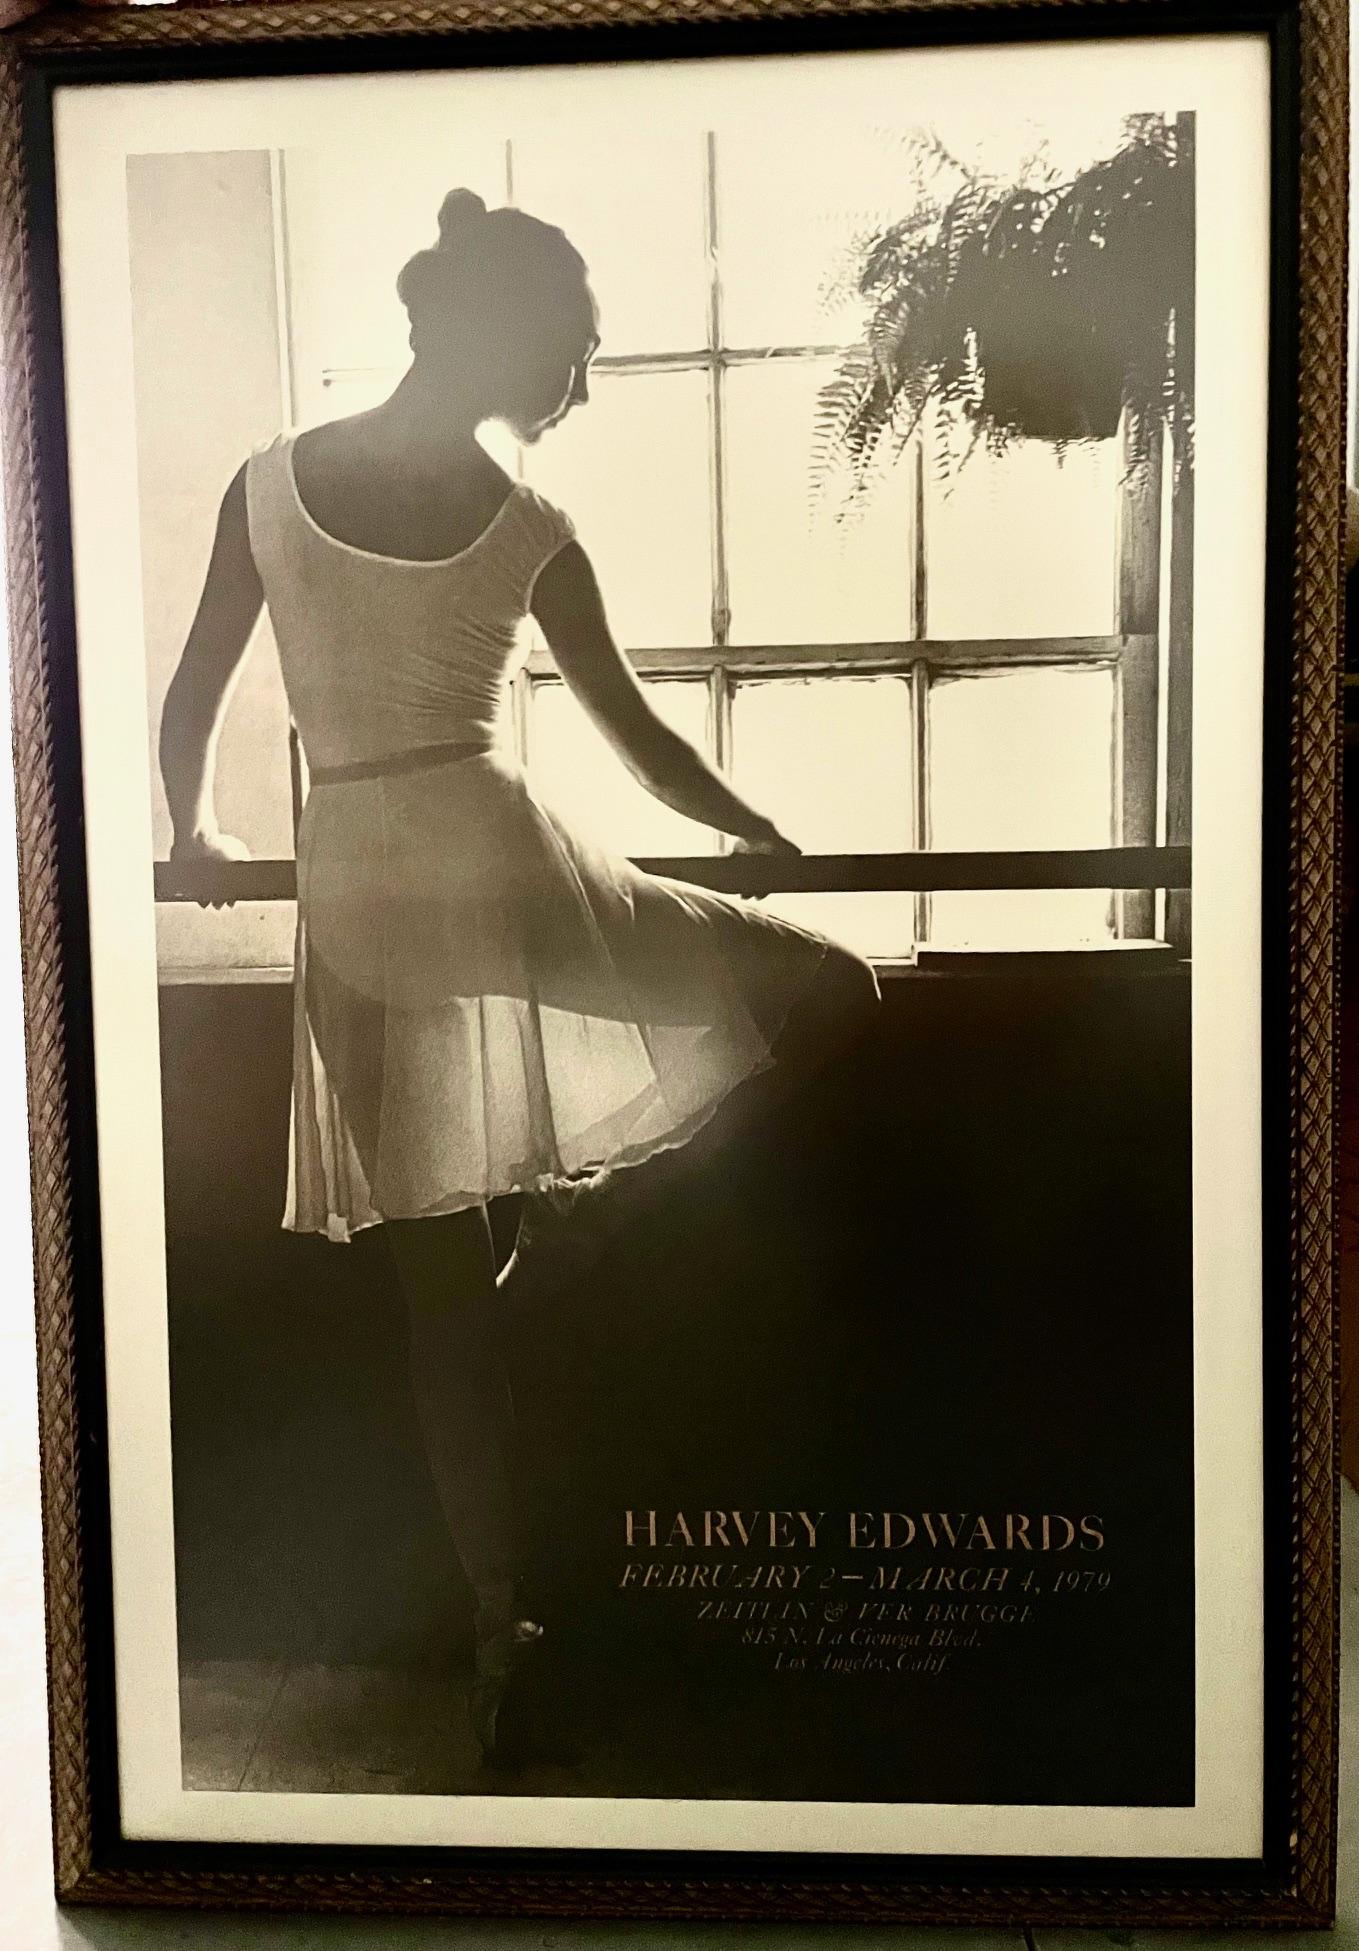 Unknown Portrait Photograph - Ballerina at the Barre   (Poster with photography by Harvey Edwards)